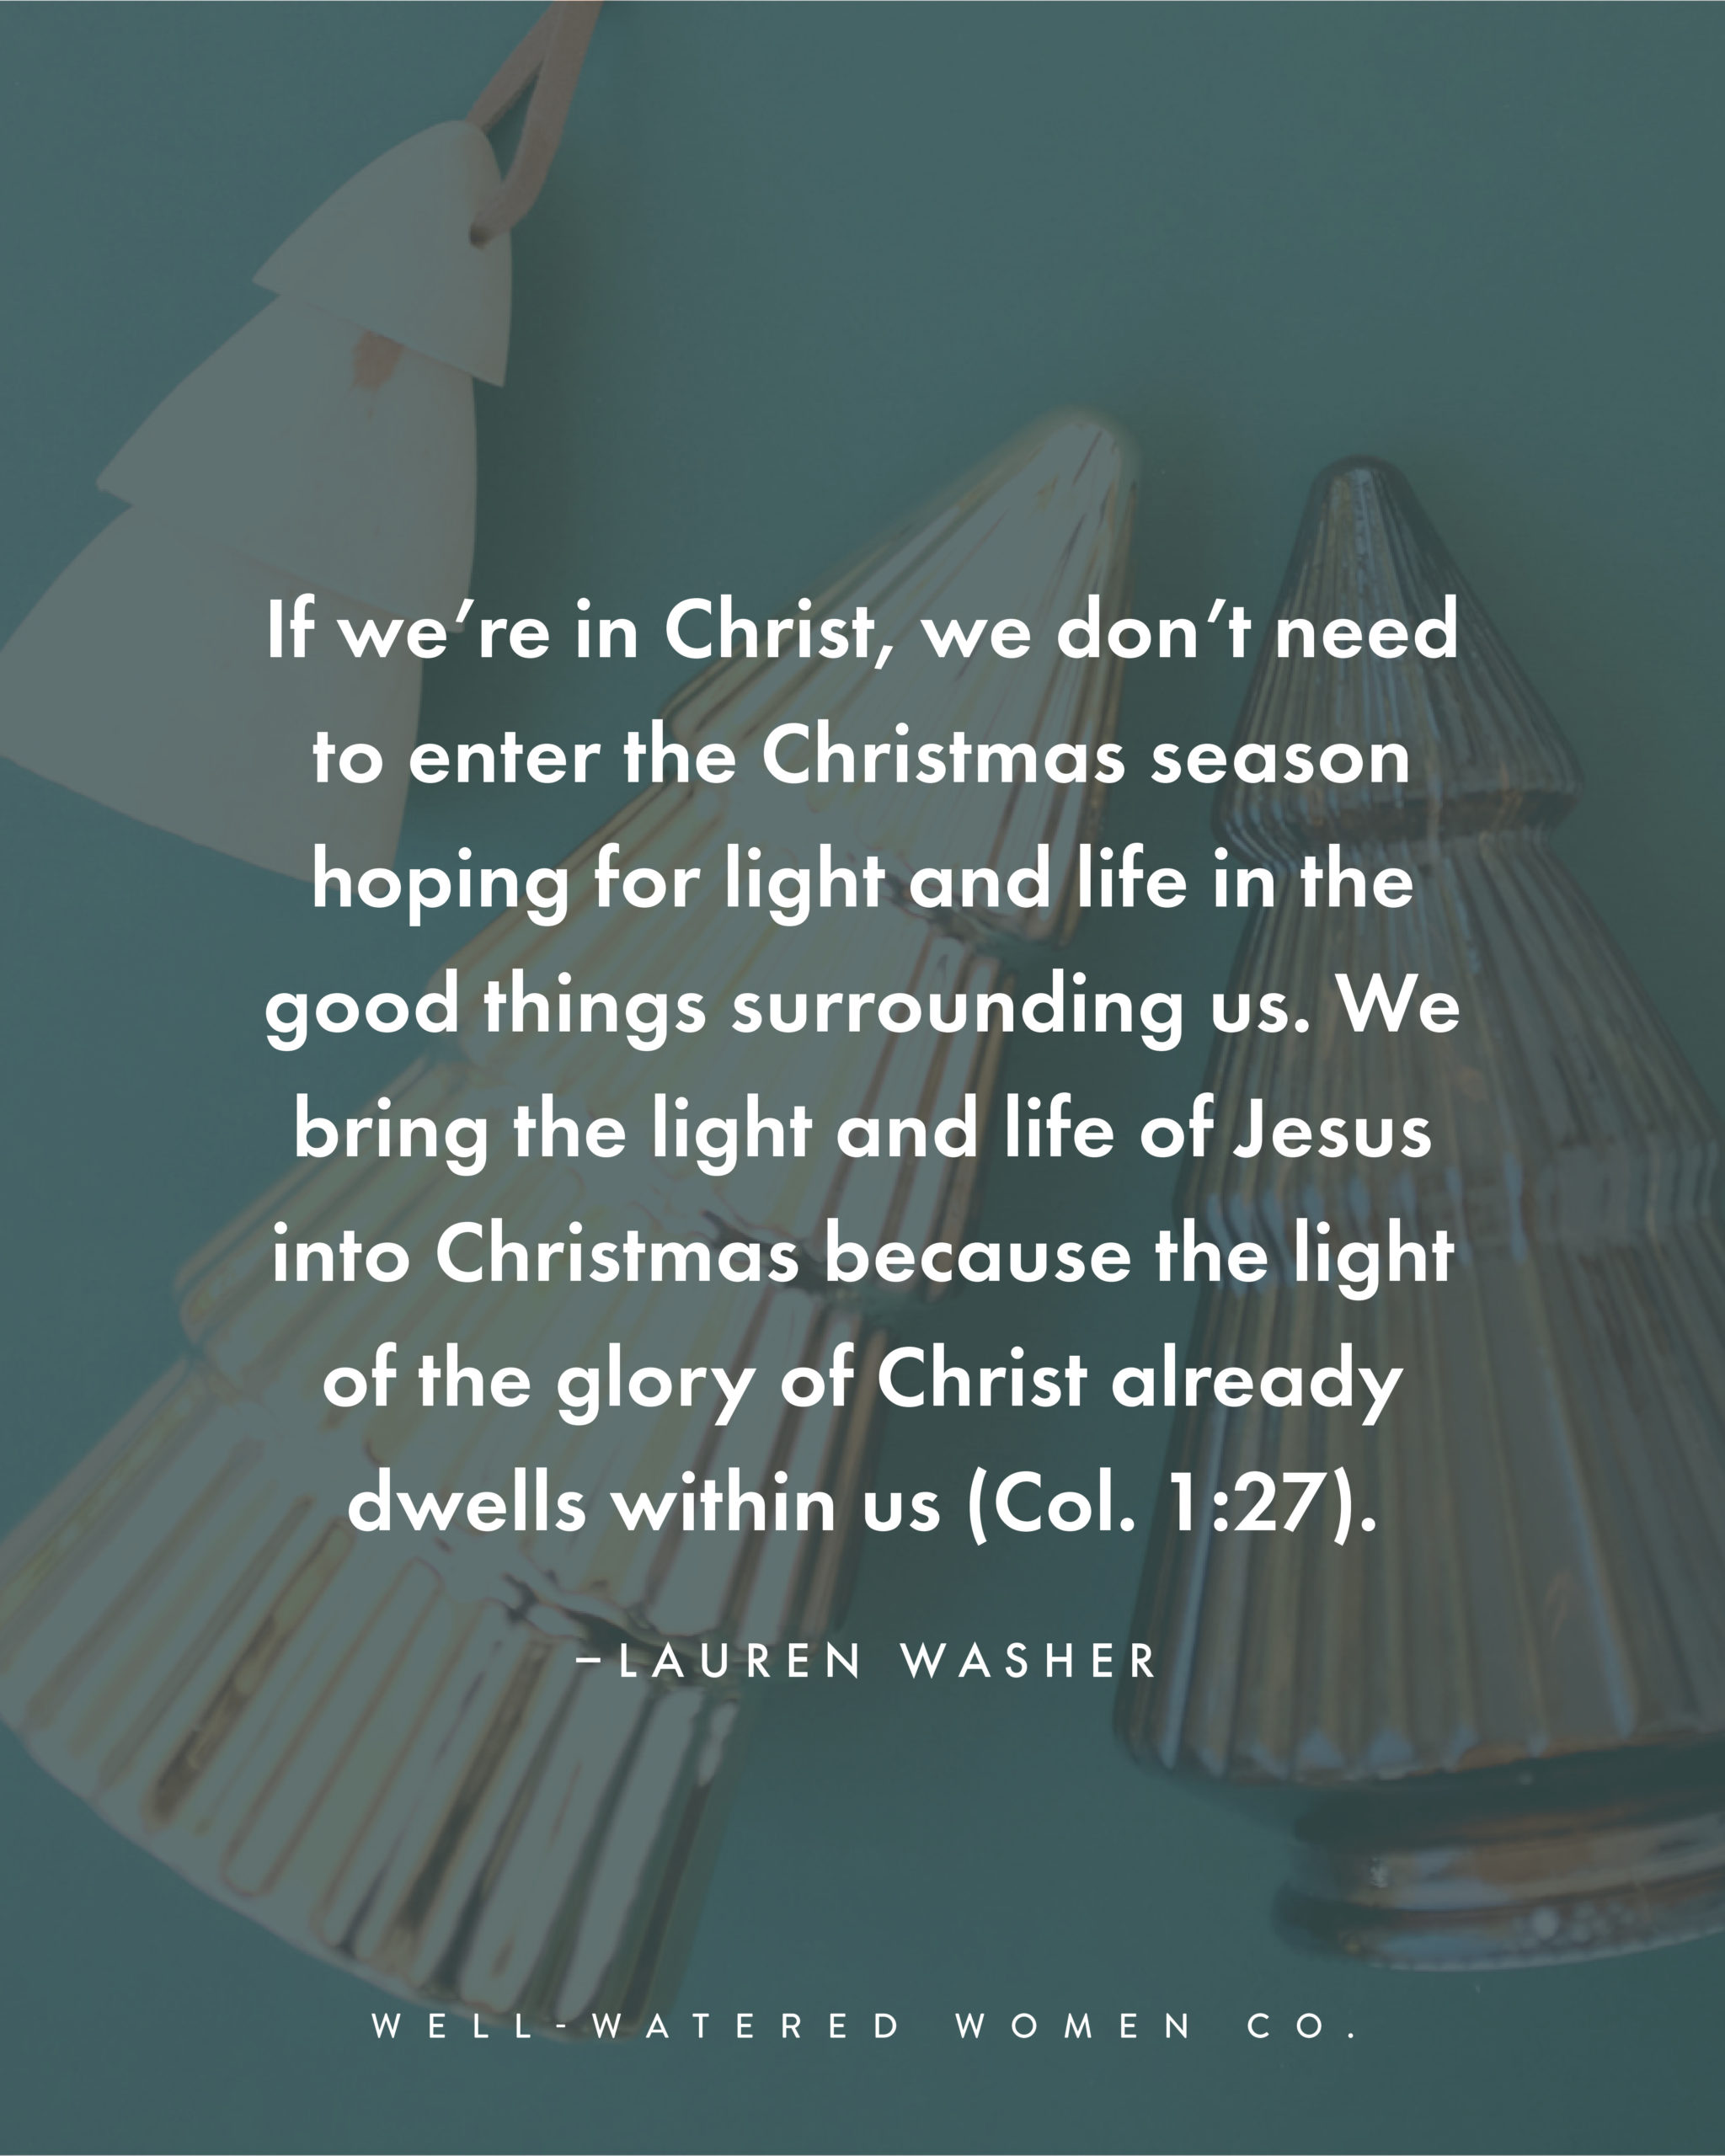 Hope in the True Light and Life of Christmas - an article from Well-Watered Women - quote